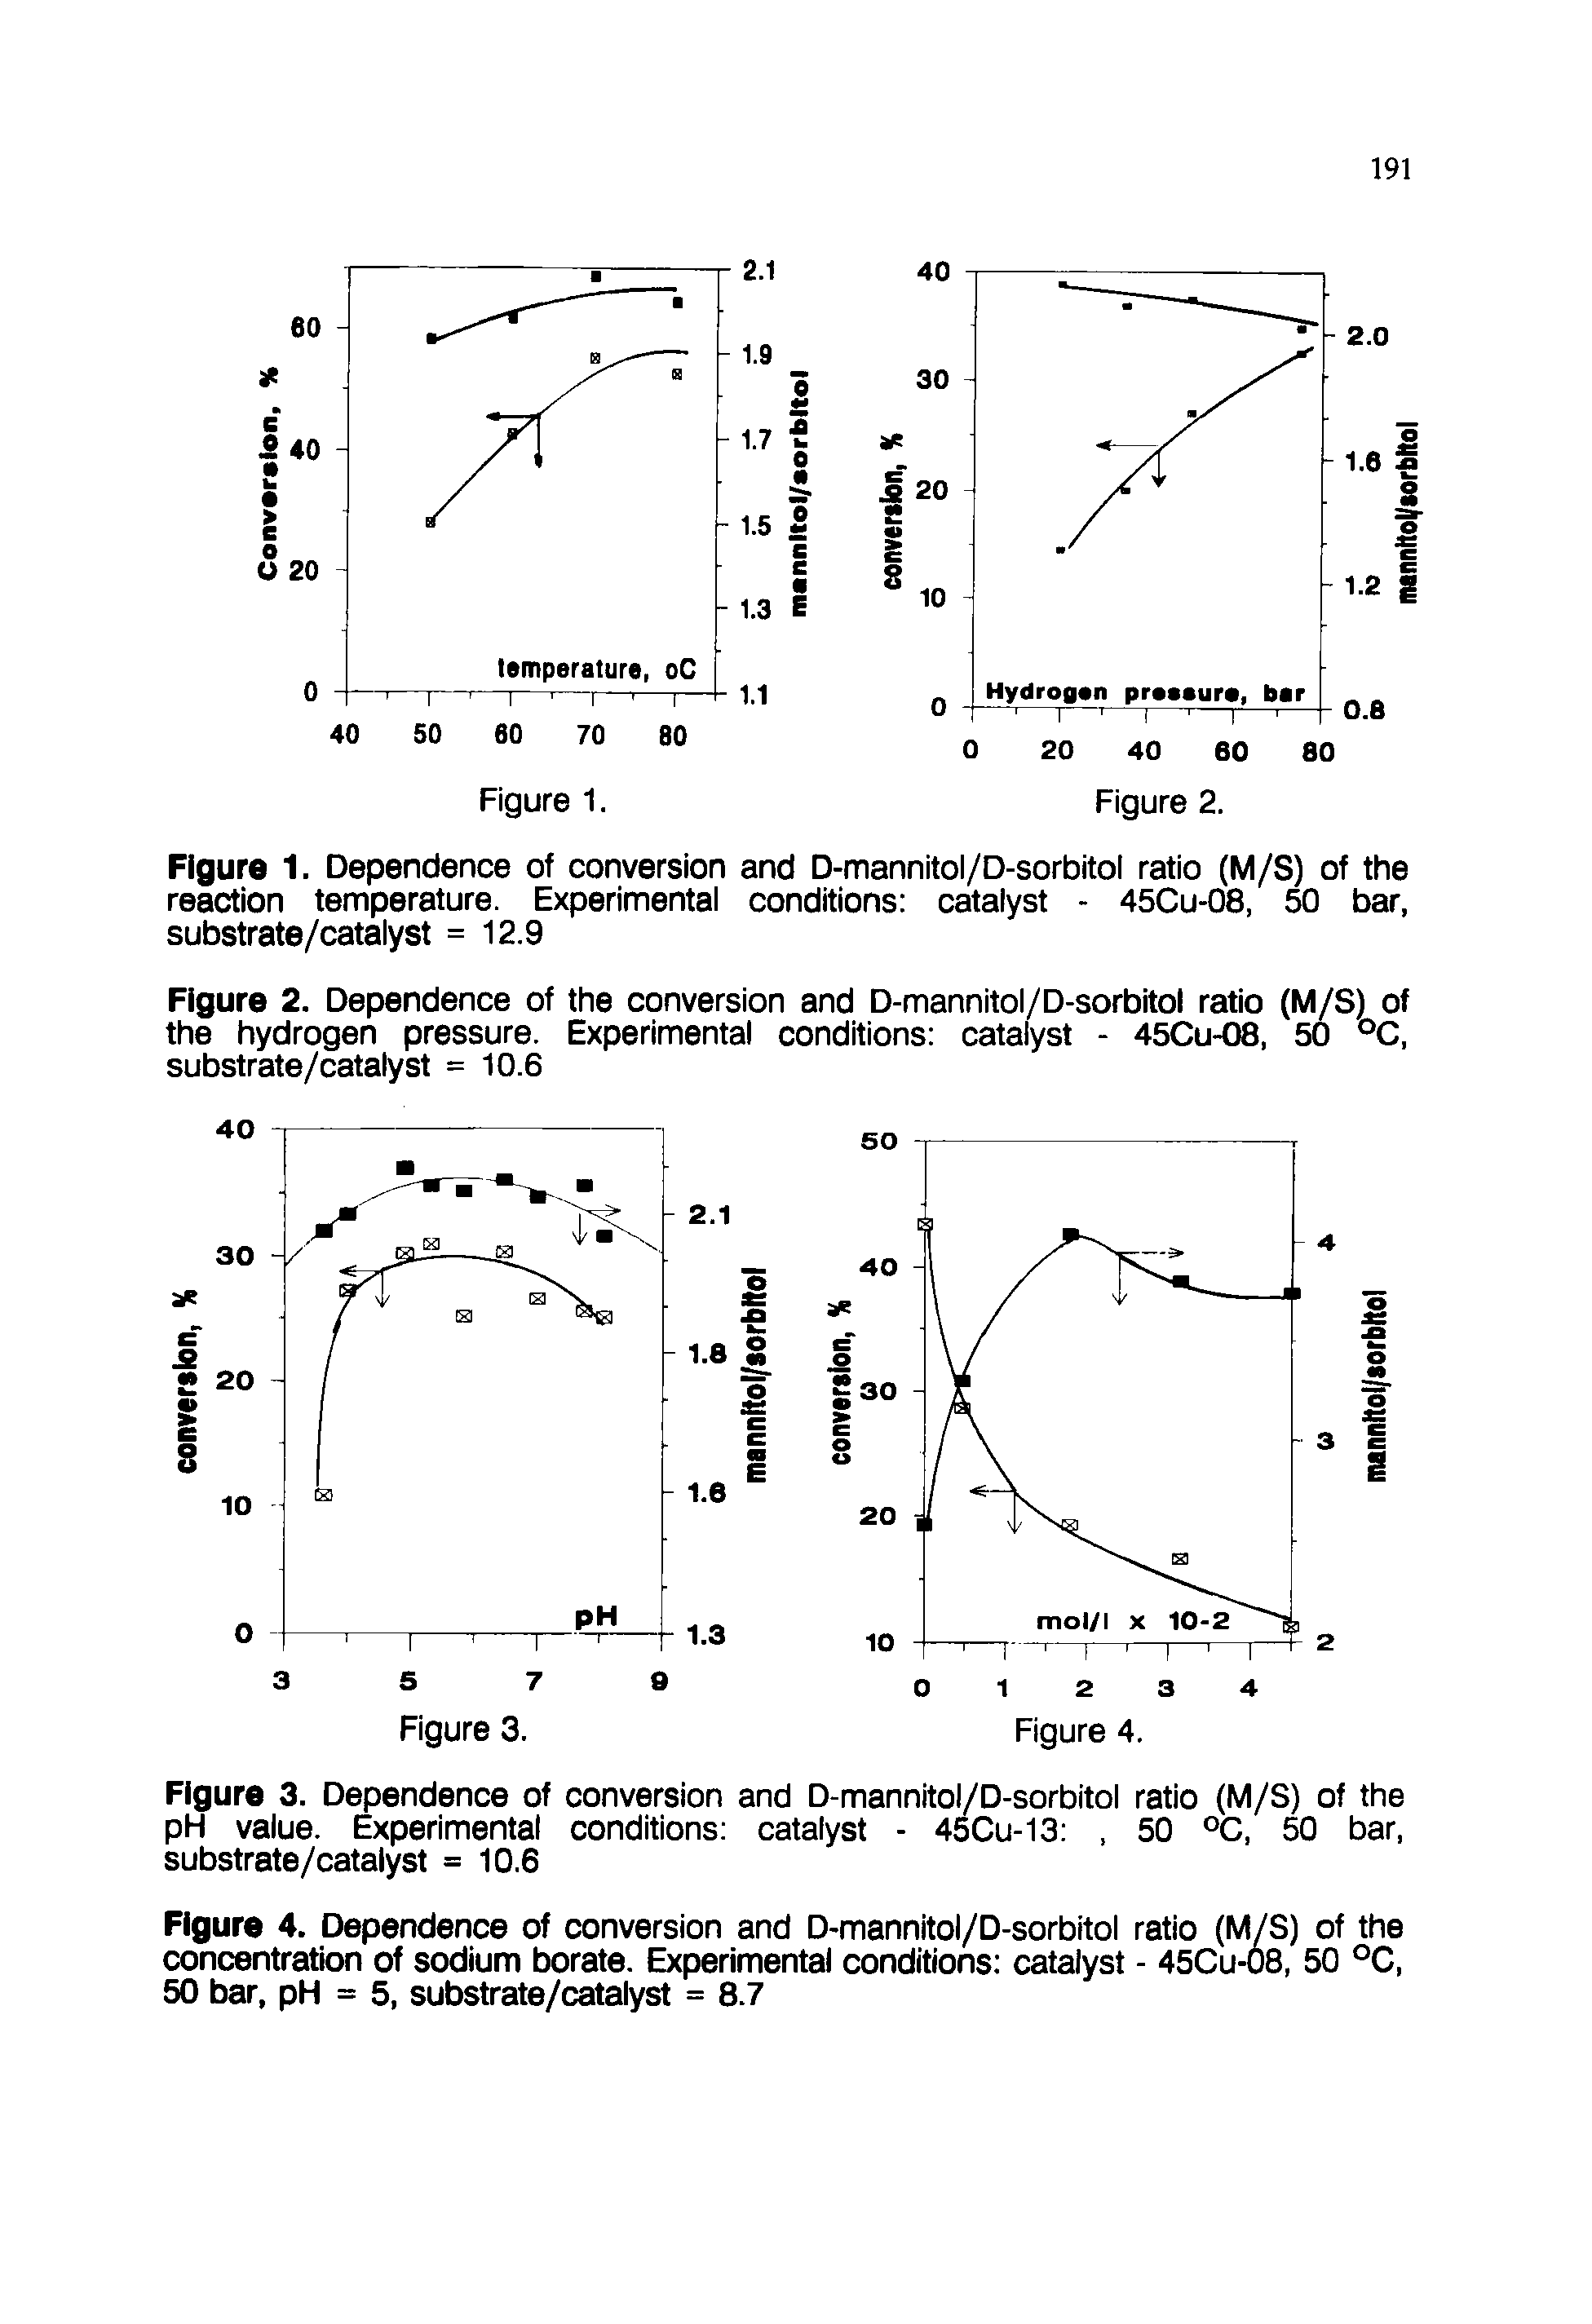 Figure 1. Dependence of conversion and D-mannitol/D-sorbitol ratio (M/S) of the reaction temperature. Experimental conditions catalyst - 45Cu-08, 50 bar, substrate/catalyst = 12.9...